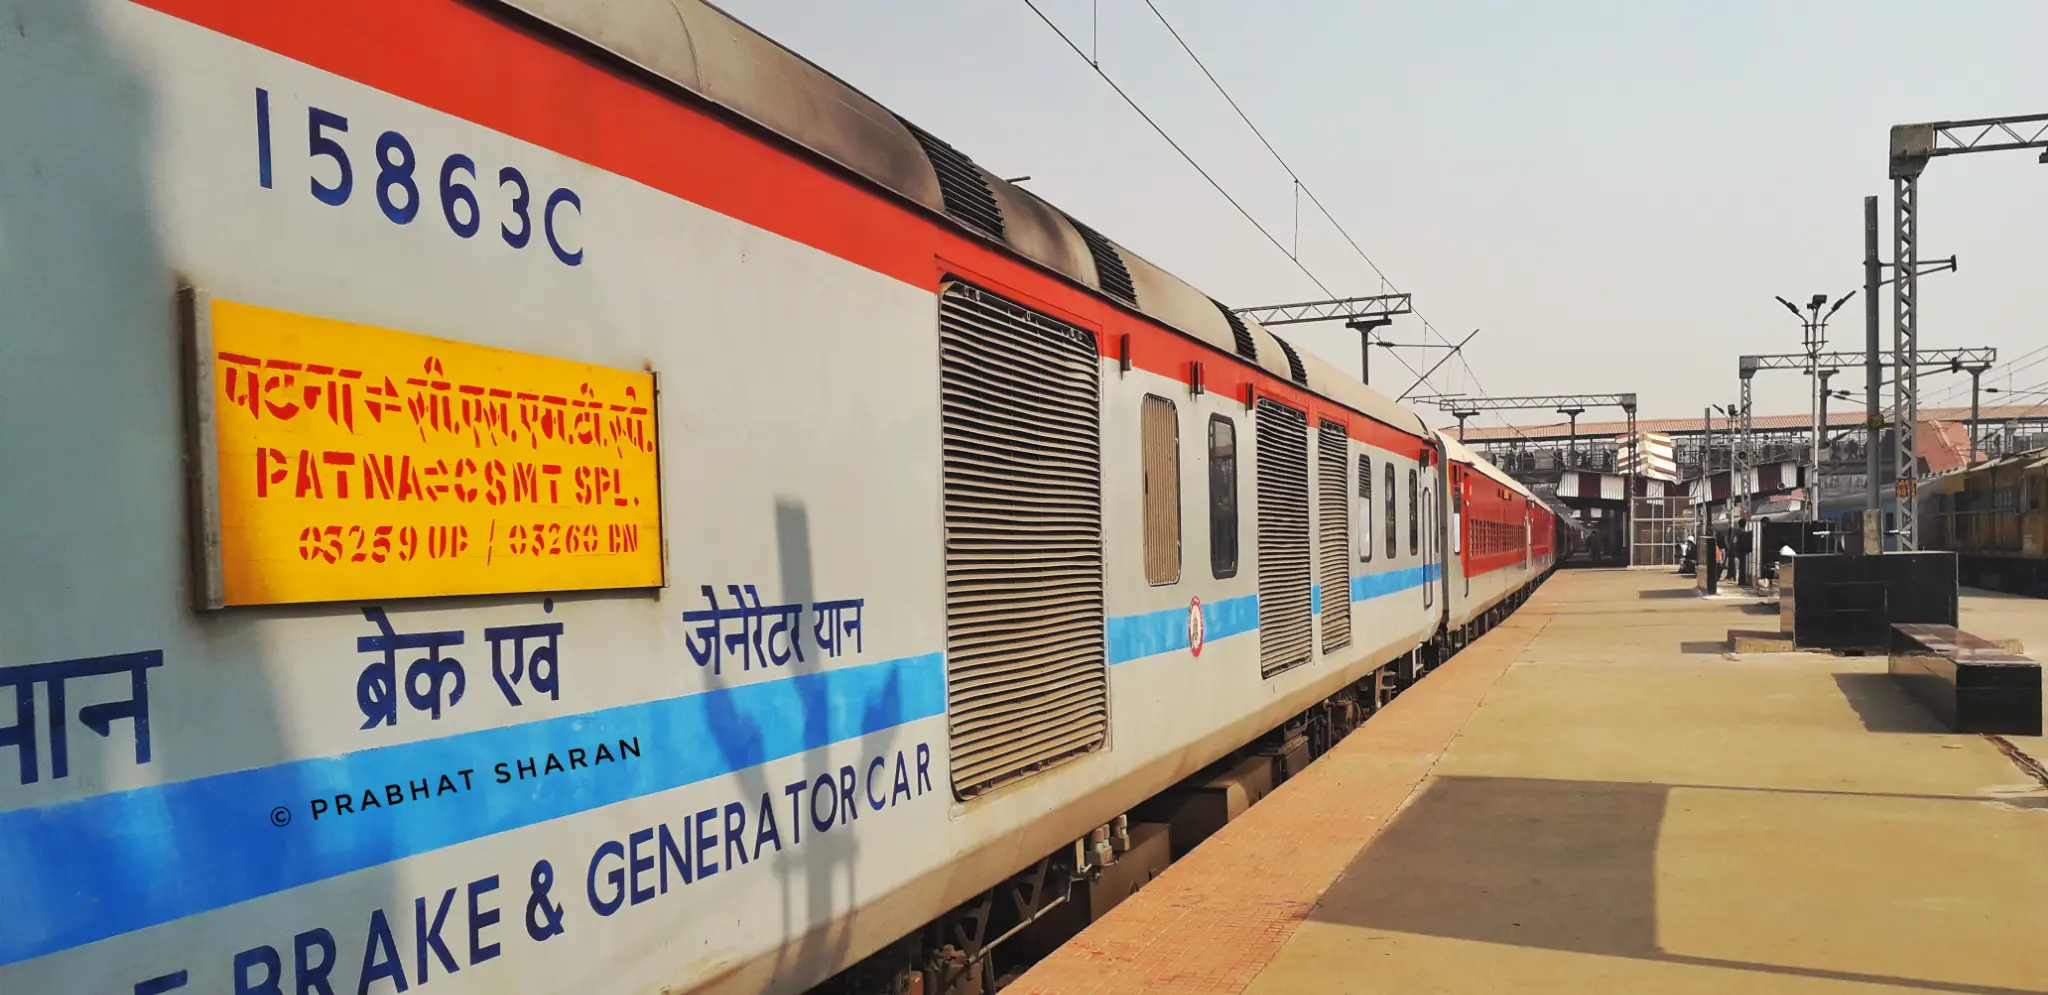 Similar coaches will be installed in these trains